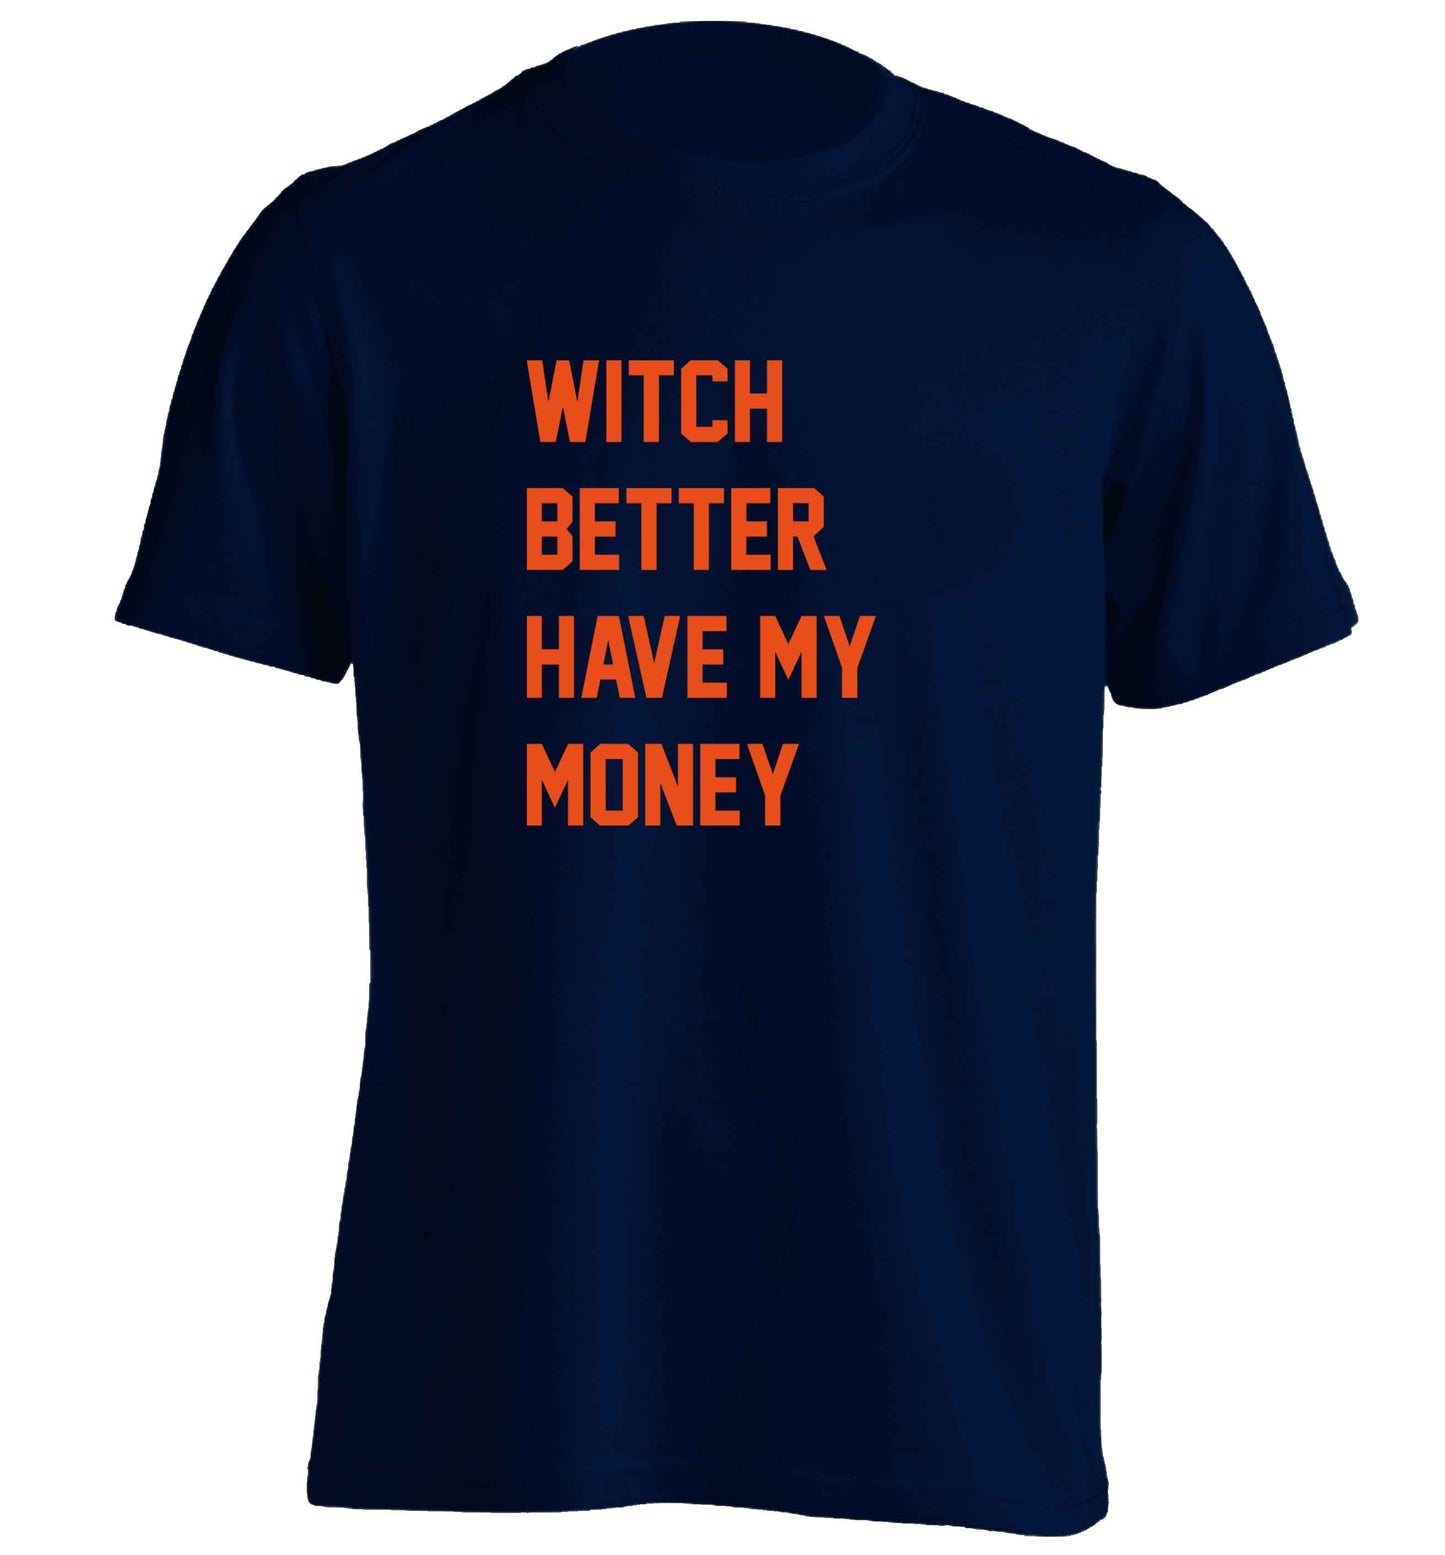 Witch better have my money adults unisex navy Tshirt 2XL